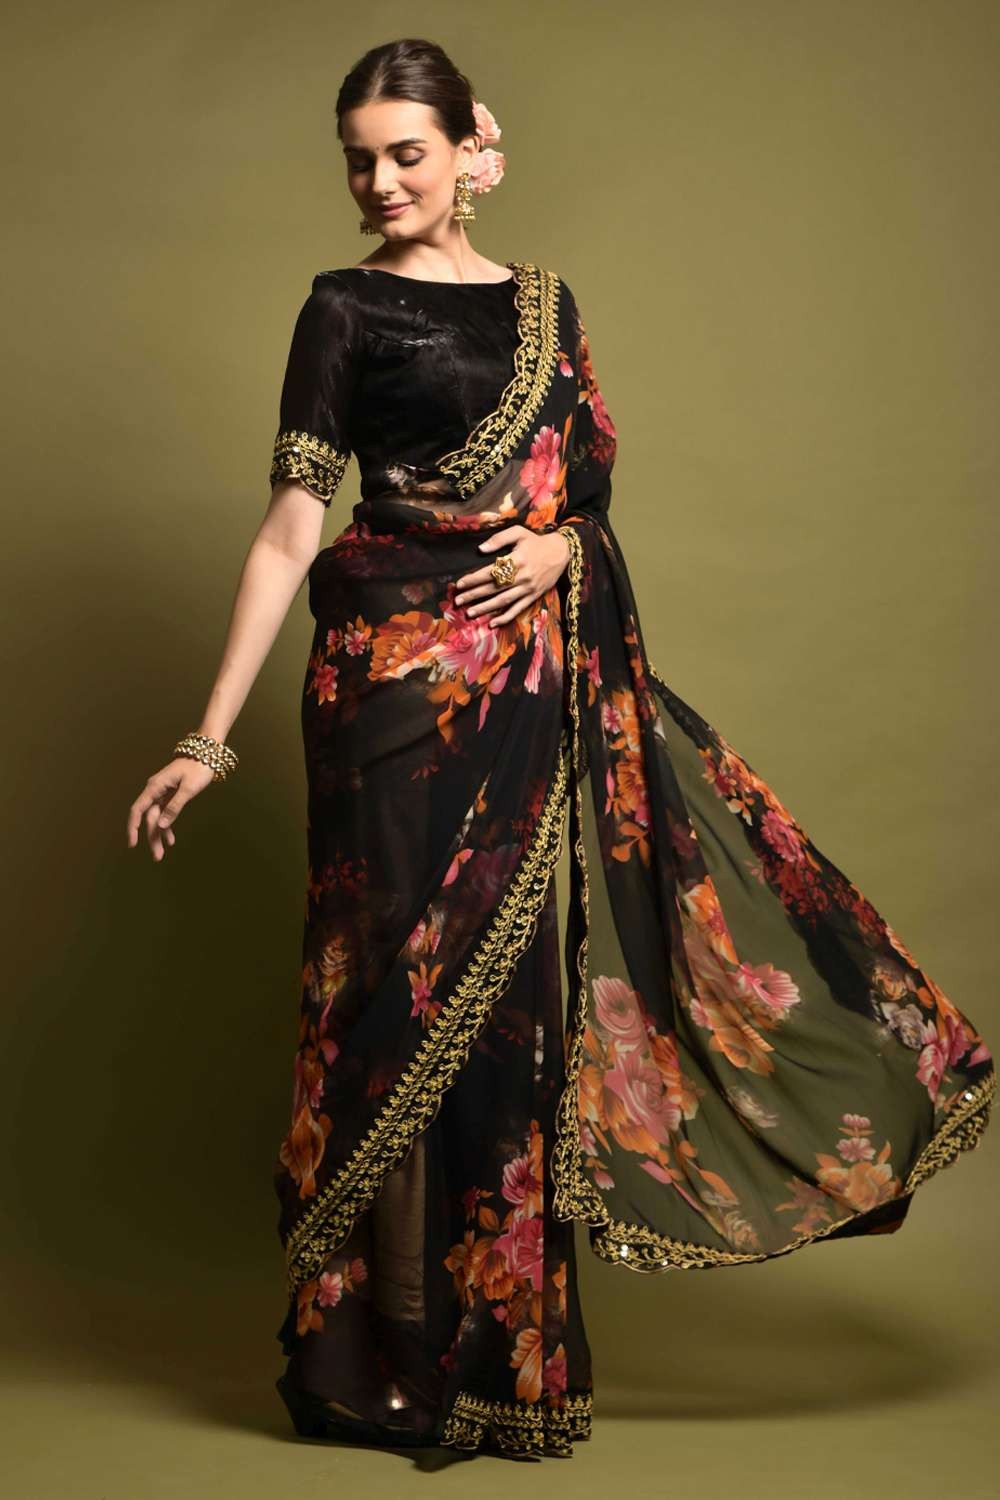 A silk georgette cherry printed sari with a black embroidered